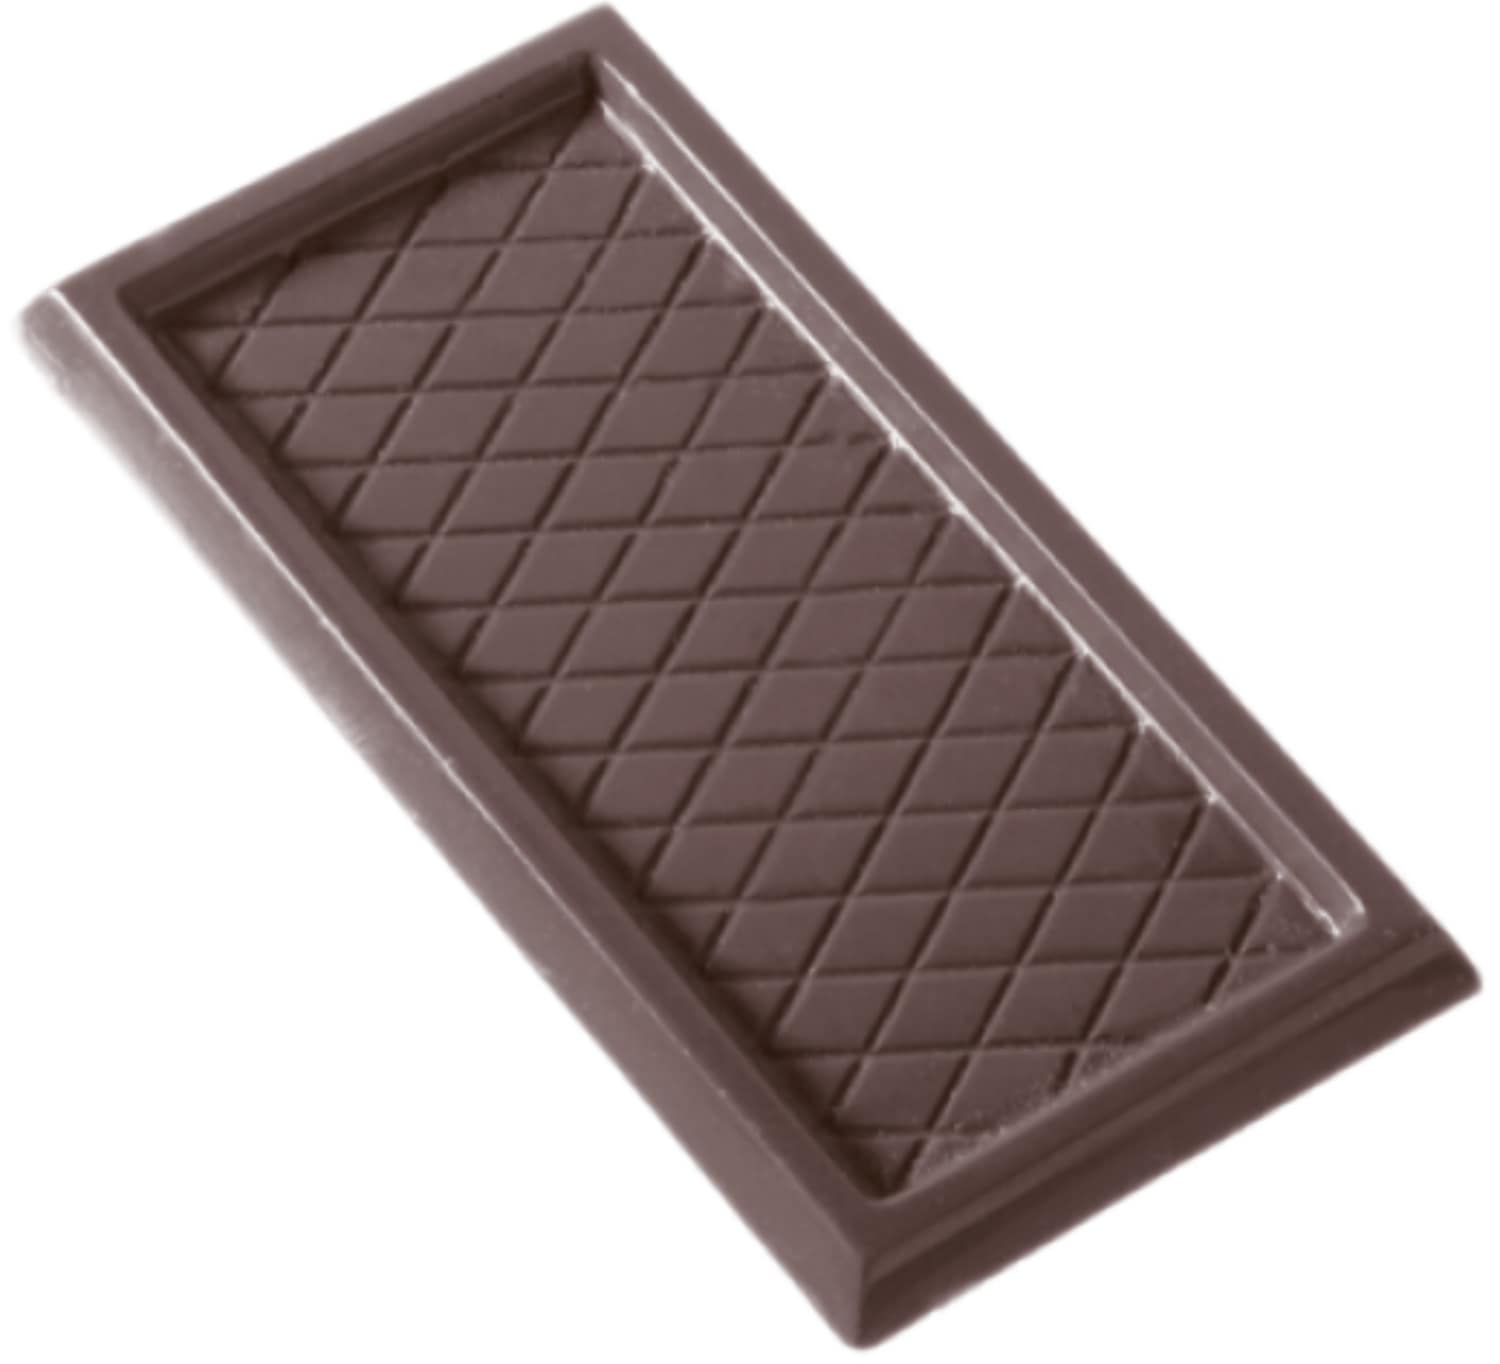 Chocolate mould "Biscuit" 422018